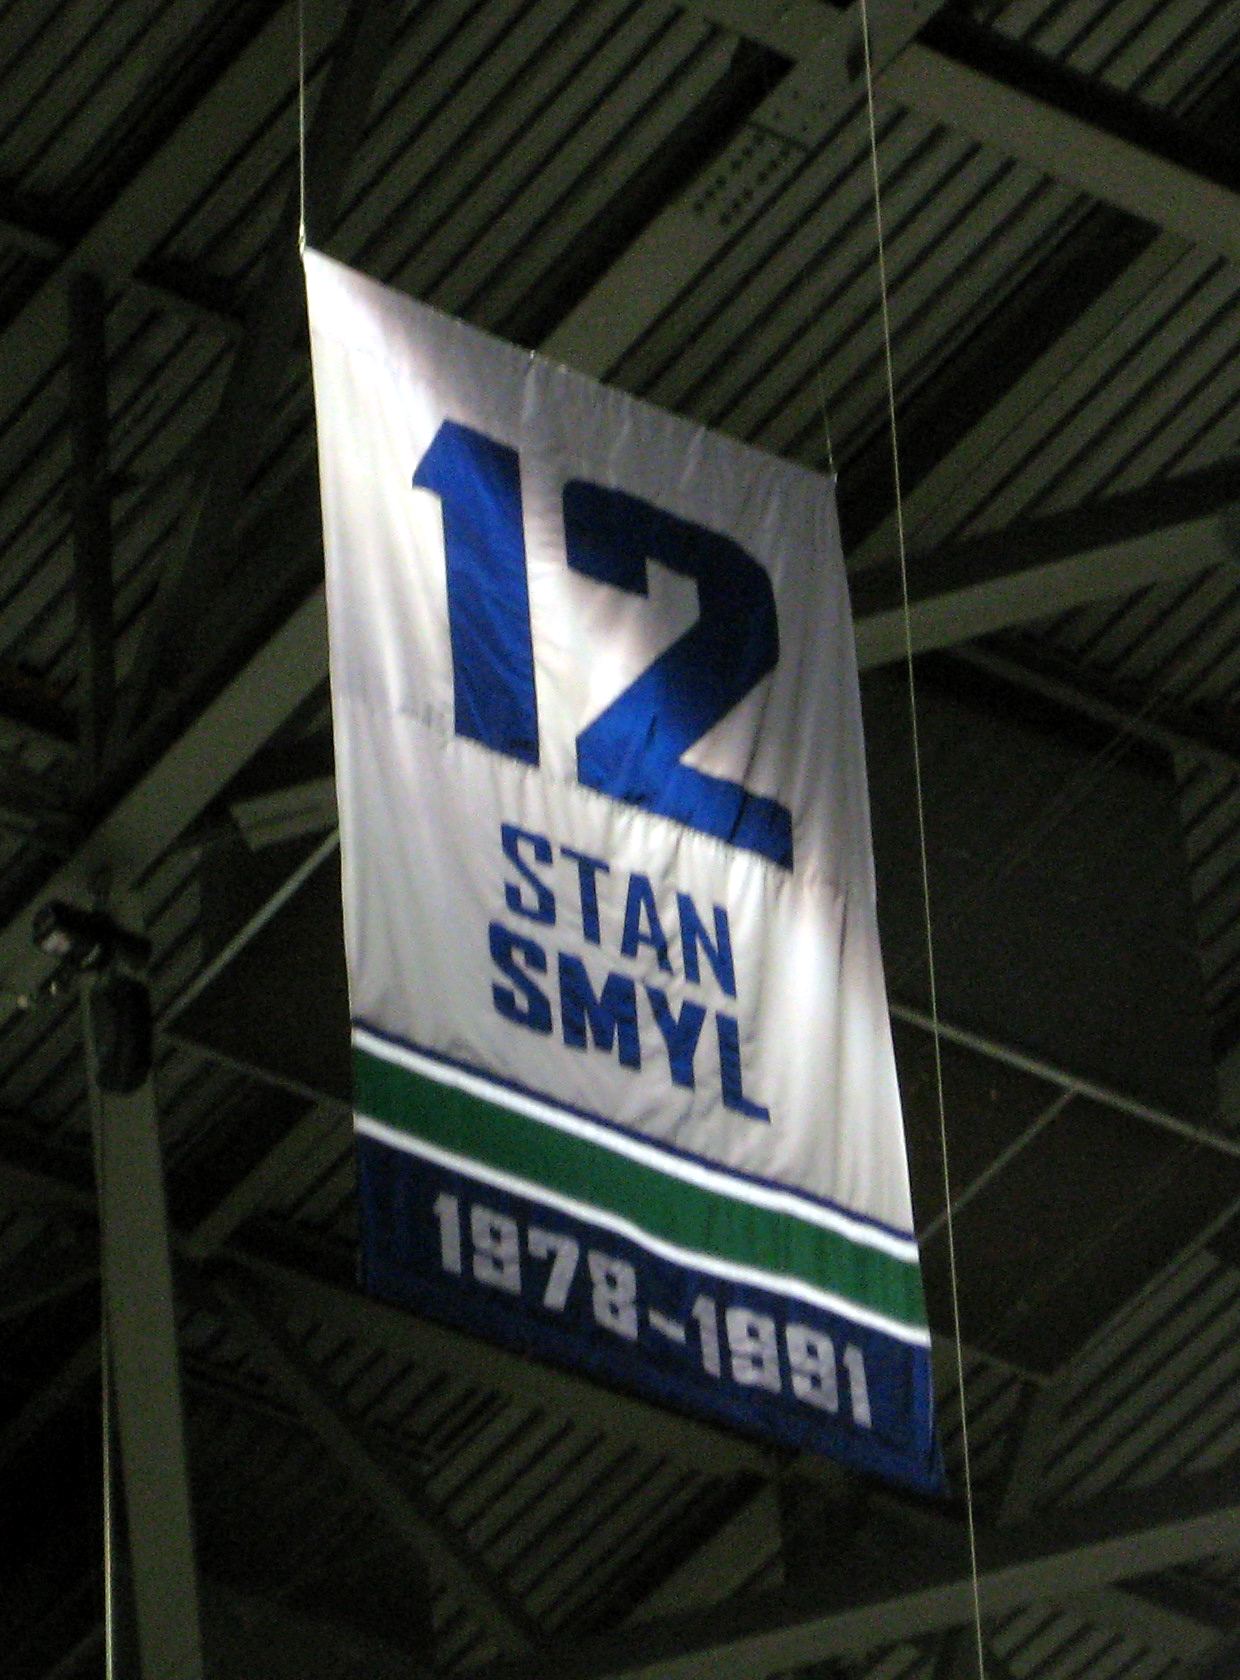 In 10 days Stan Smyl will no longer be lonely.